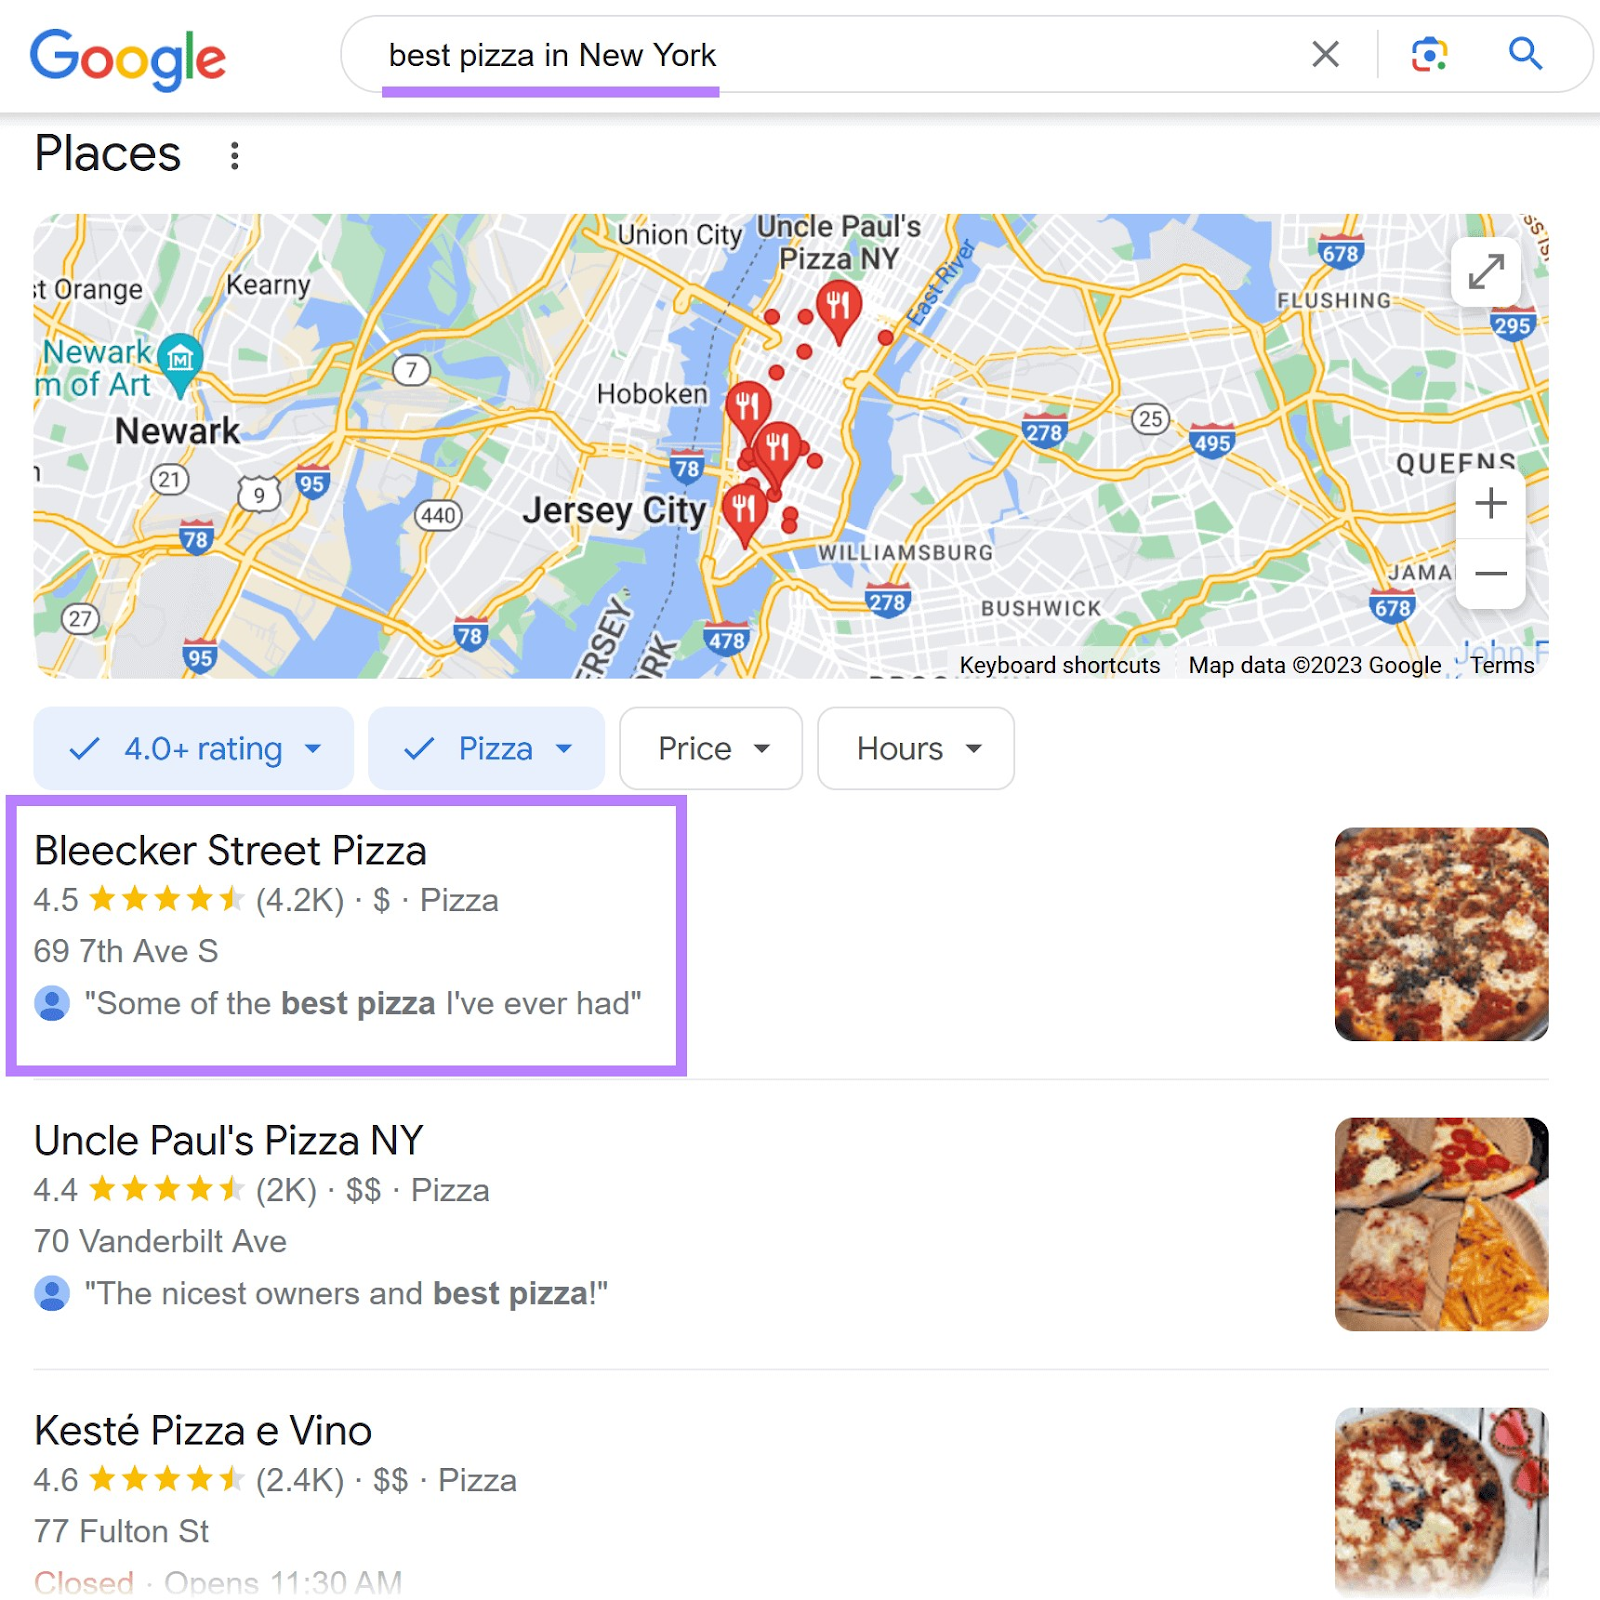 Google search results for "best pizza in New York"